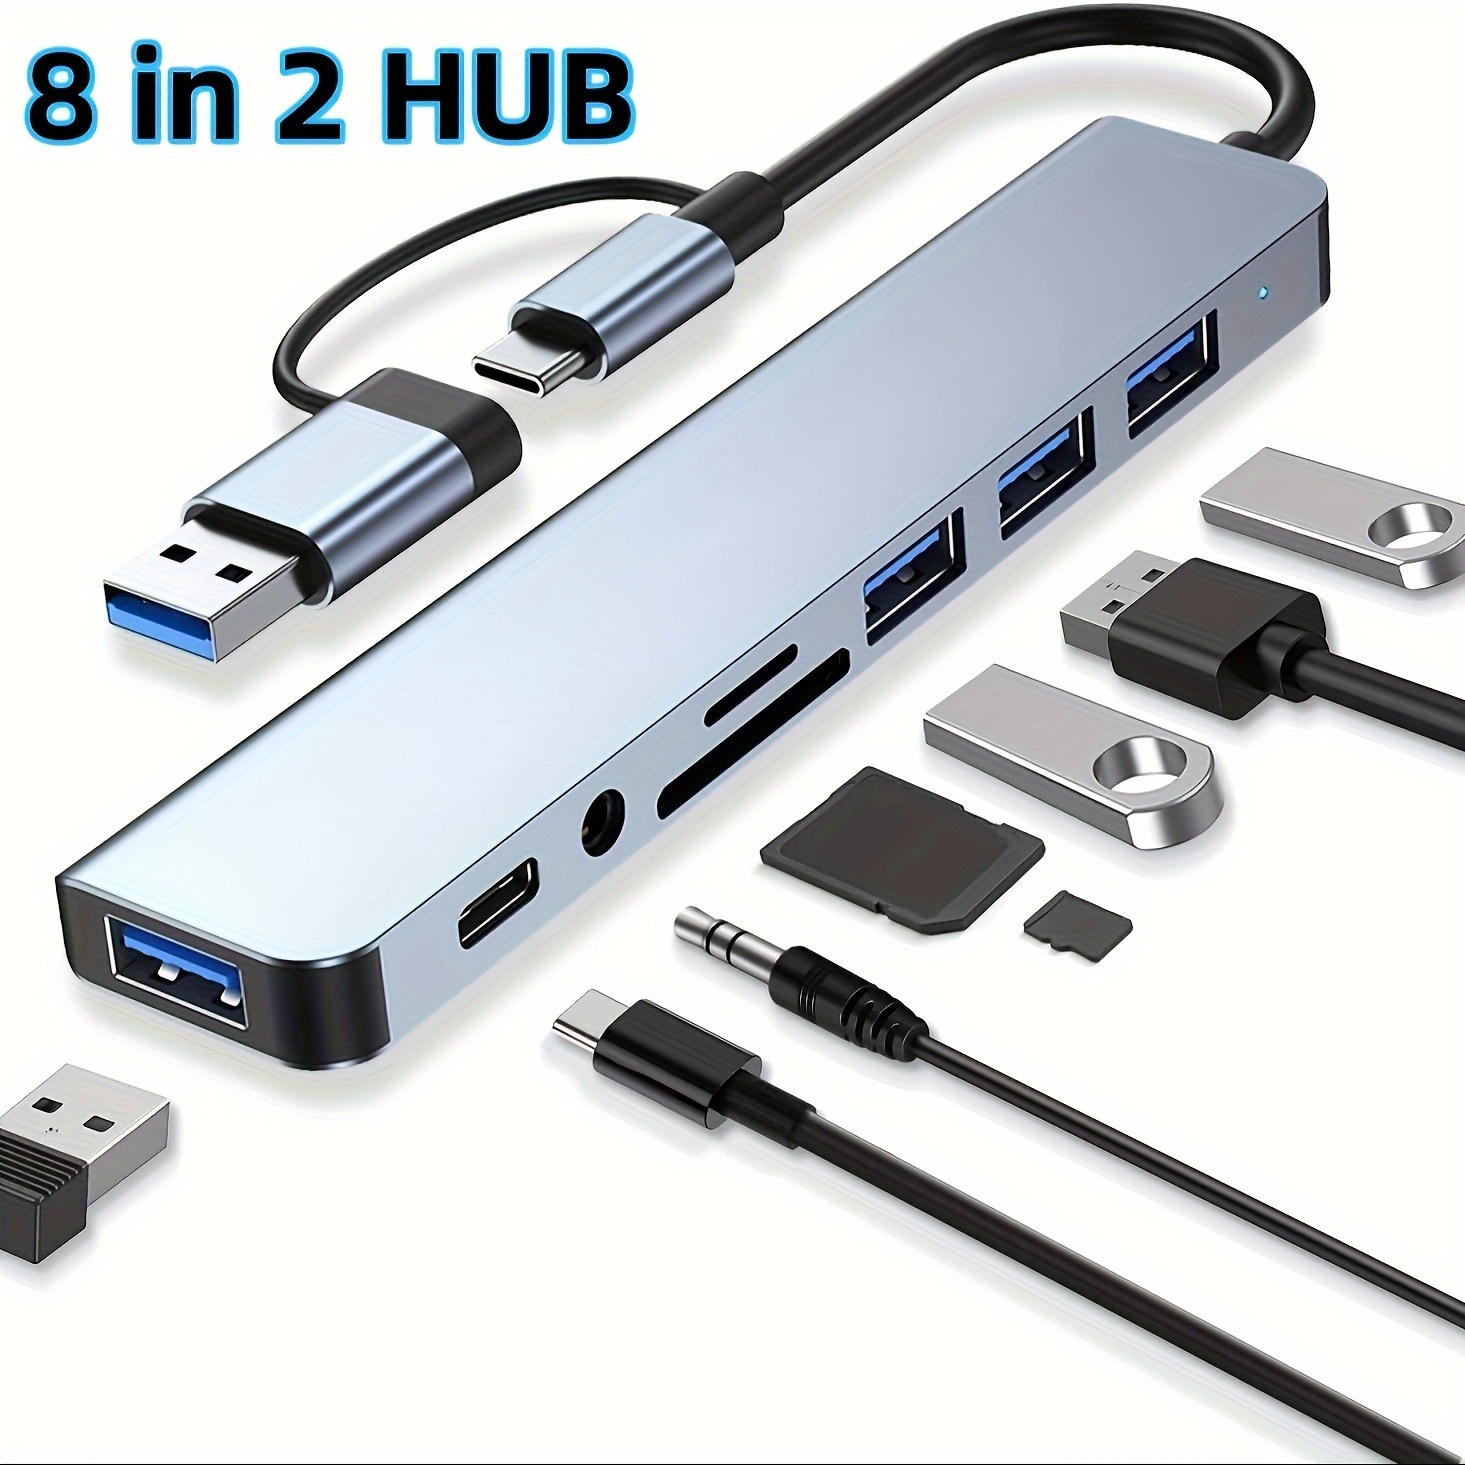 

Usb Usb Splitter 8 In 1 Usb Extender With 4 Usb Ports 1 Usbc Port Tf/sd Card Reader Audio Output Compatible With Macbook/pad Pro/dell/ Laptop/phone